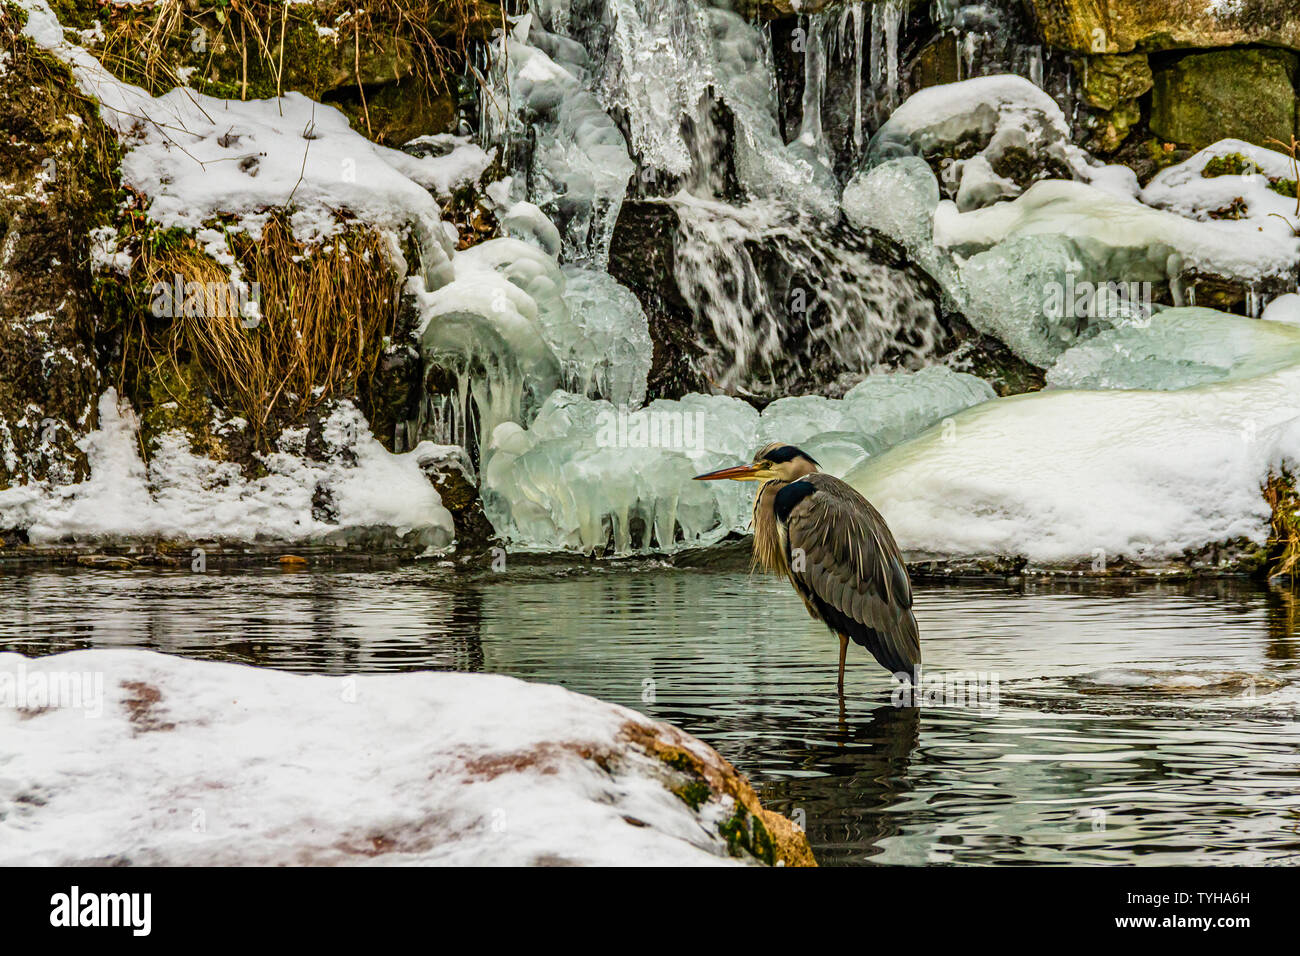 A Grey Heron standing in icy water near a frozen waterfall. Stockholm, Sweden. January 2019. Stock Photo